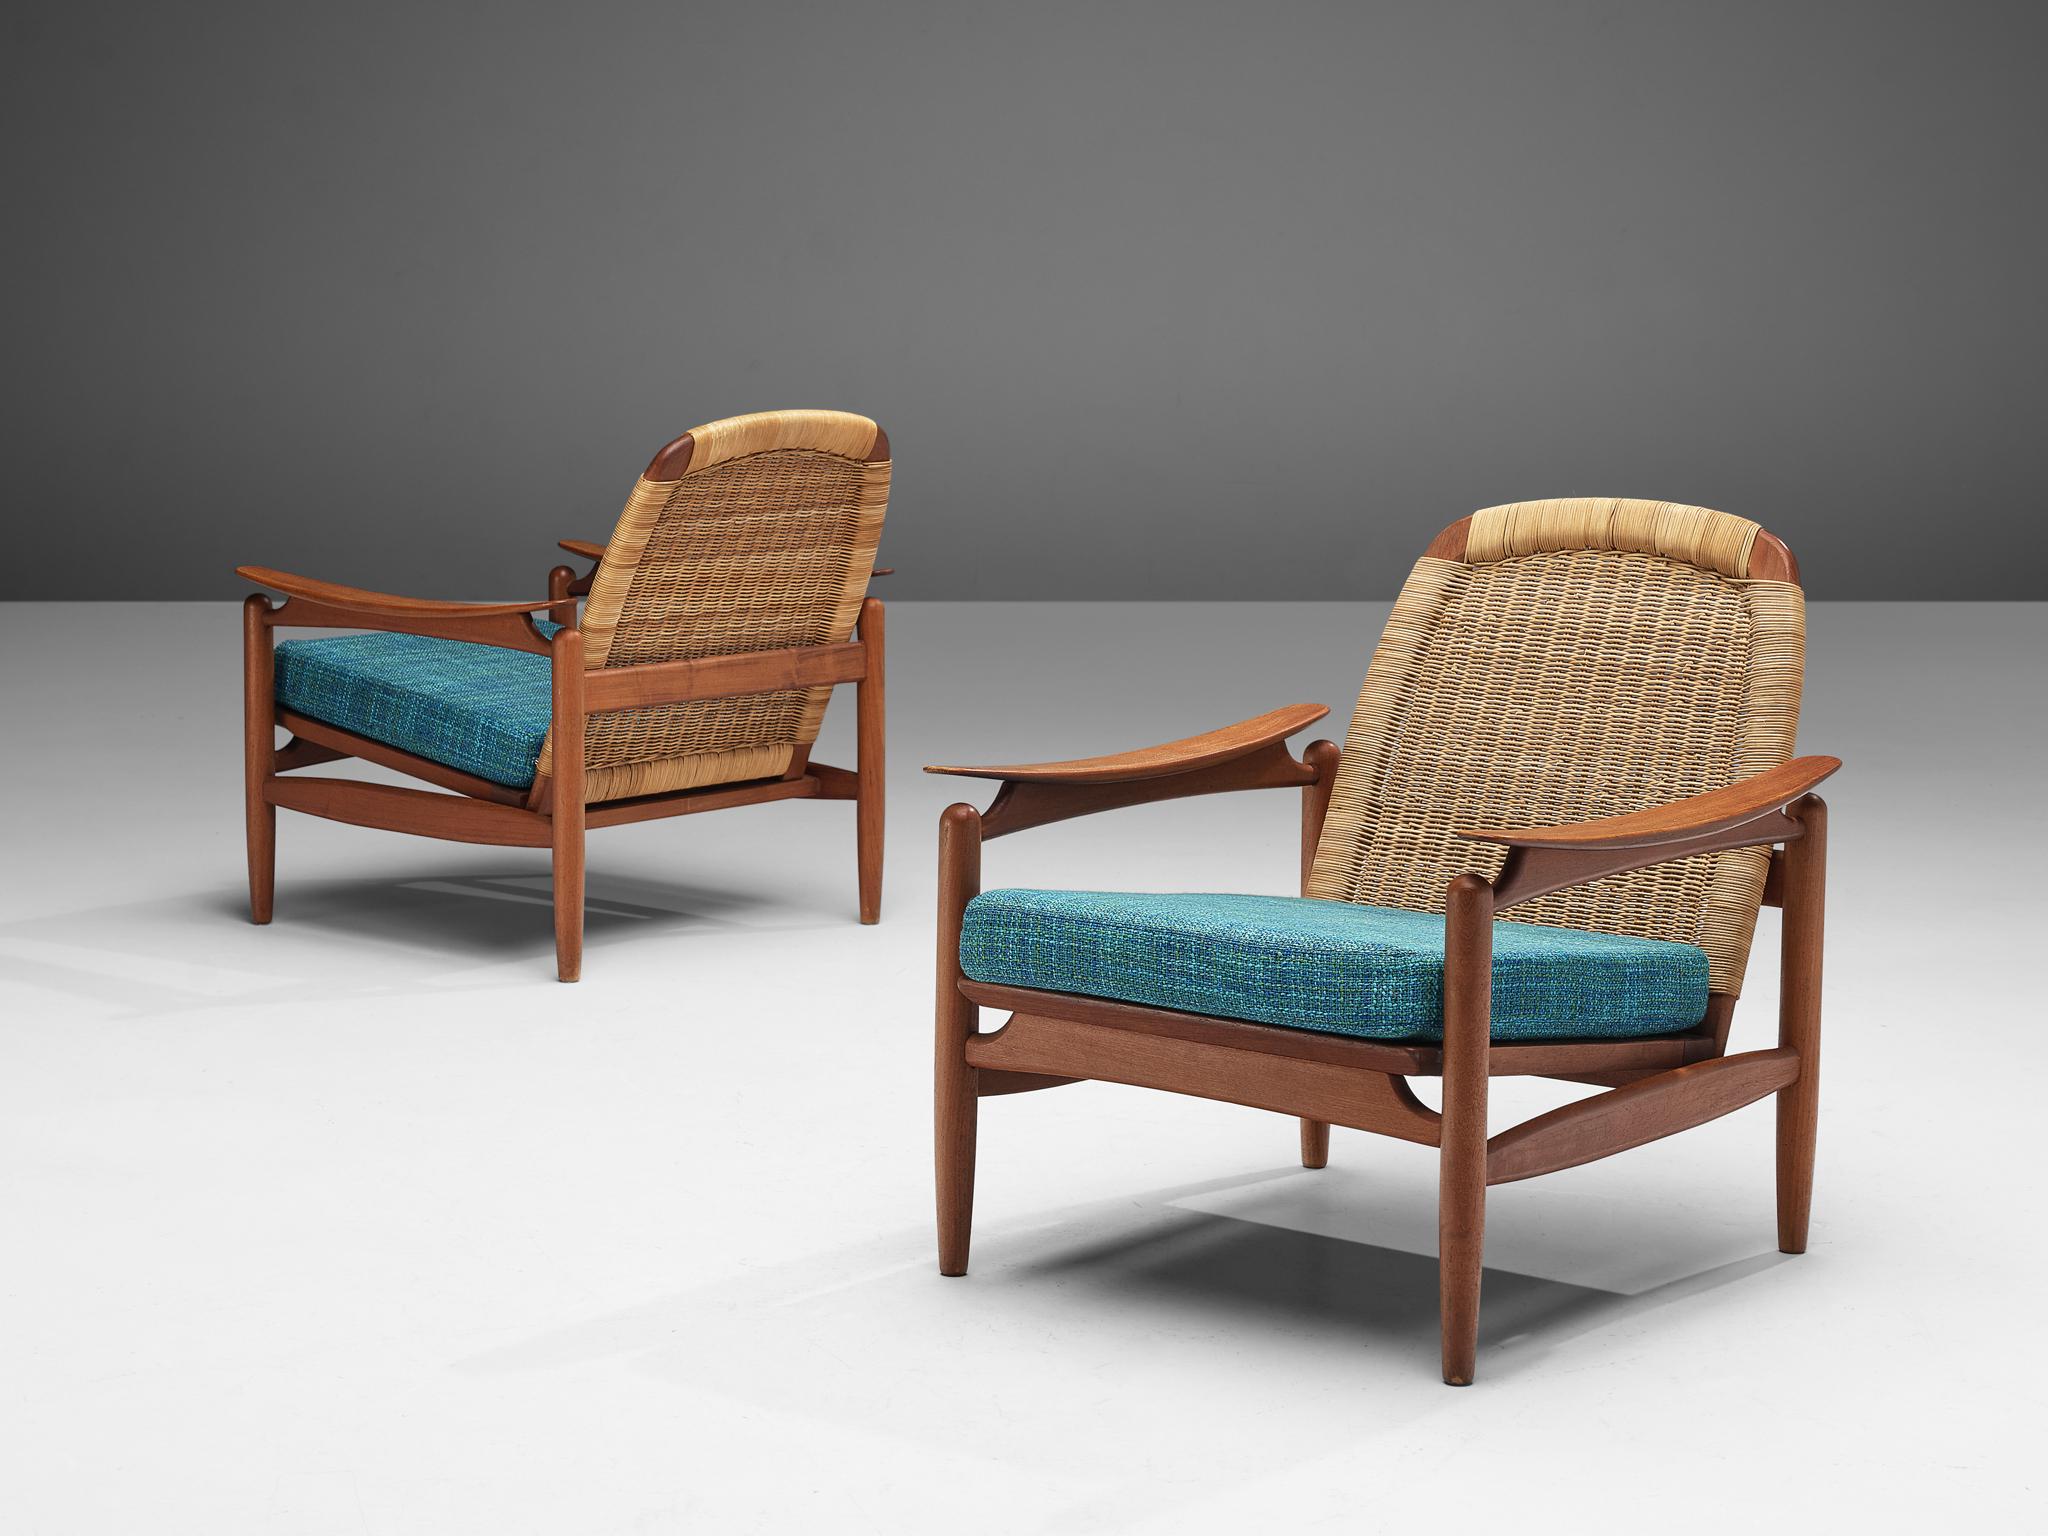 Pair of lounge chair, teak, cane, fabric upholstery, Denmark, 1960s

Comfortable lounge chairs with beautiful frame. This chair is simplistic yet elegant and modern in design. Due to the structured frame, it has a very sculptural feel. The sleek